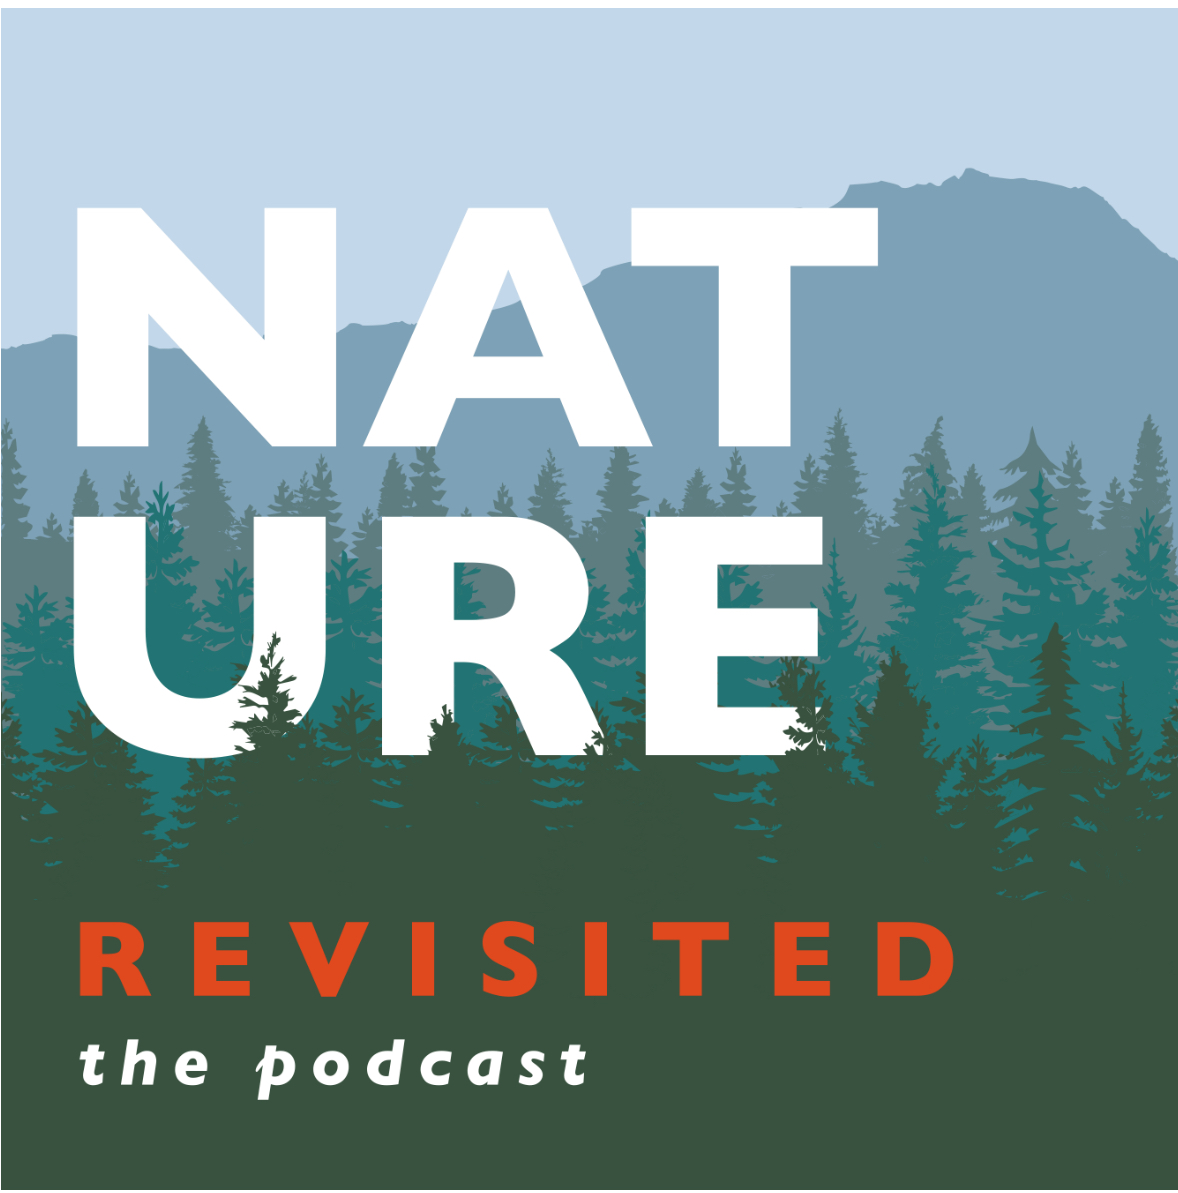 Last month I had such an interesting time talking with Stefan van Norden, the host of Nature Revisited – a podcast dedicated to exploring our relationships to the natural world. Our conversation aired on April 2. To catch my interview, the link is noordenproductions.com/nature-revisit…